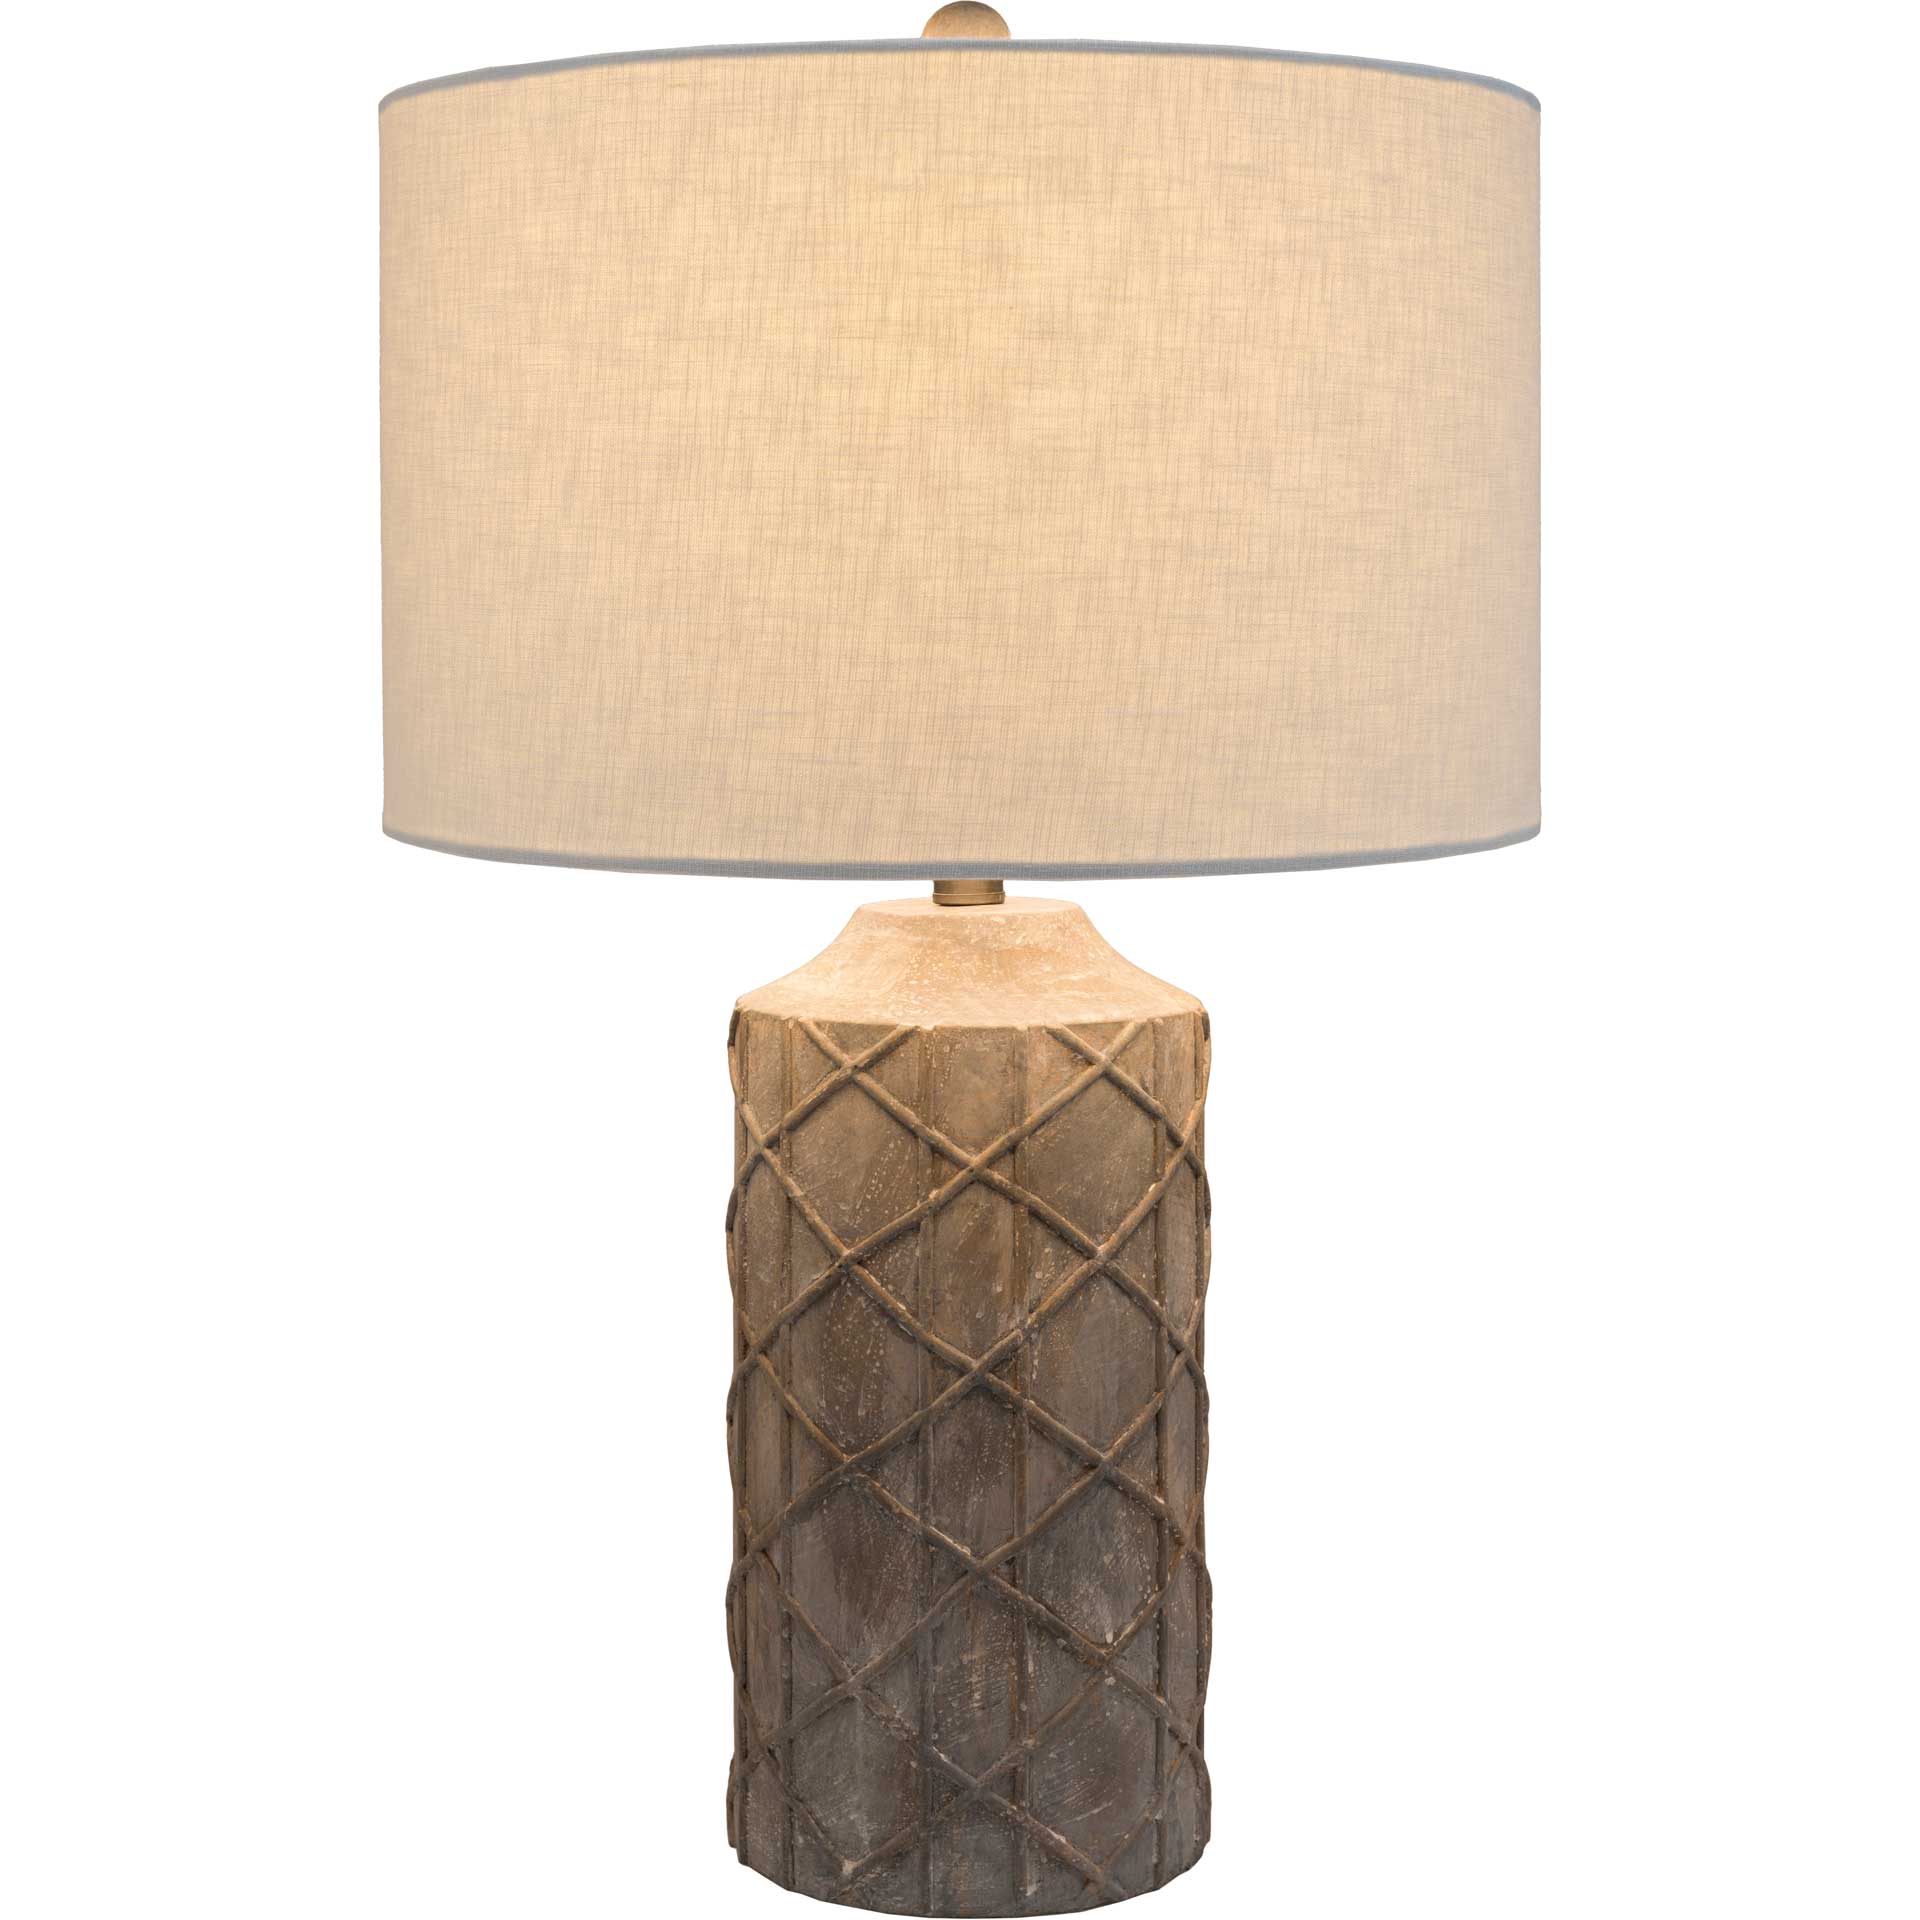 Braxton Table Lamp Camel/Ivory/Taupe